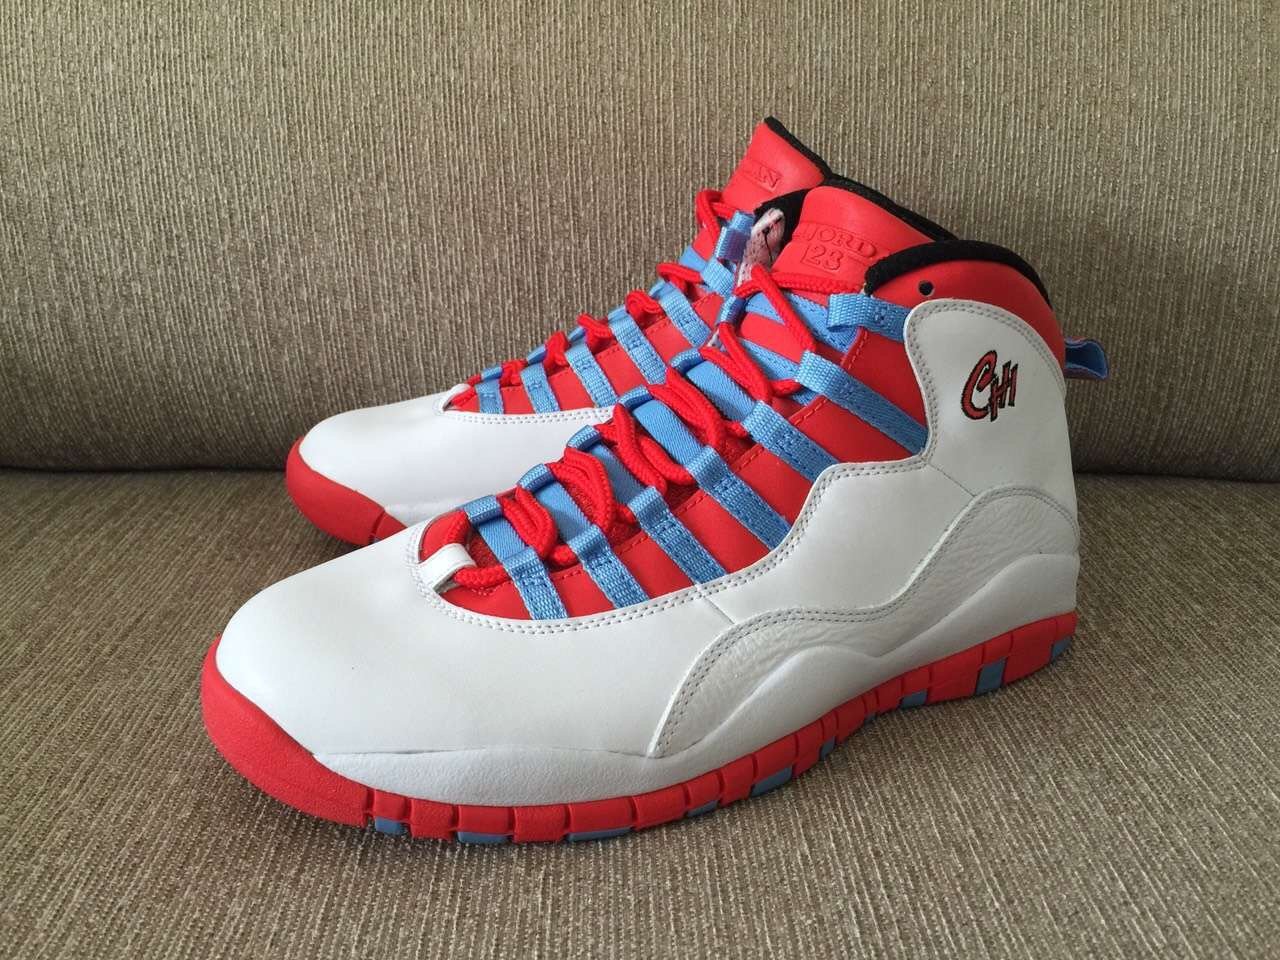 red white and blue jordan 10